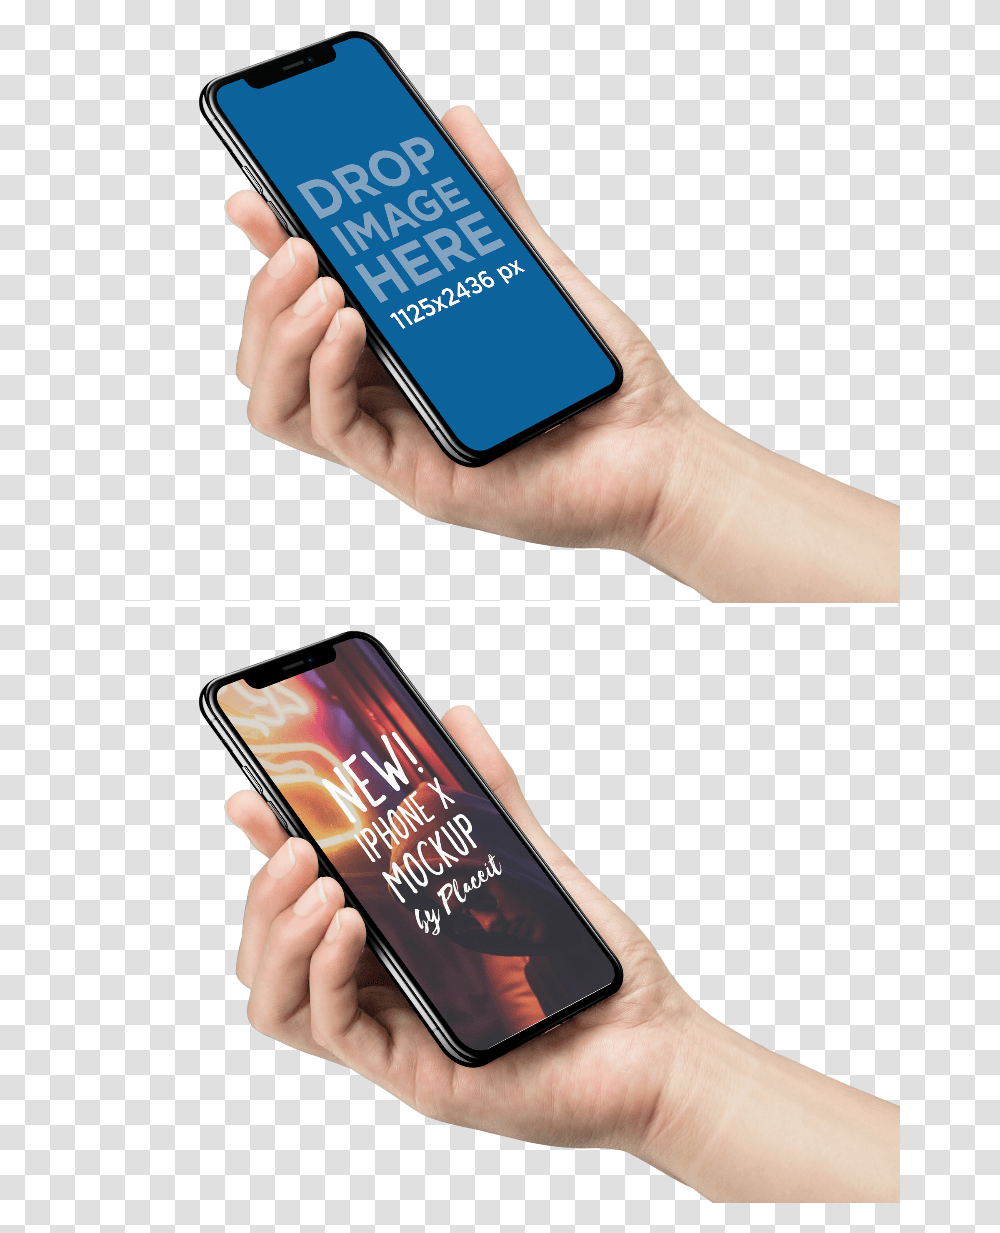 Iphone X Mockup Being Held Against Mockup Iphone In Hands, Electronics, Mobile Phone, Cell Phone, Person Transparent Png